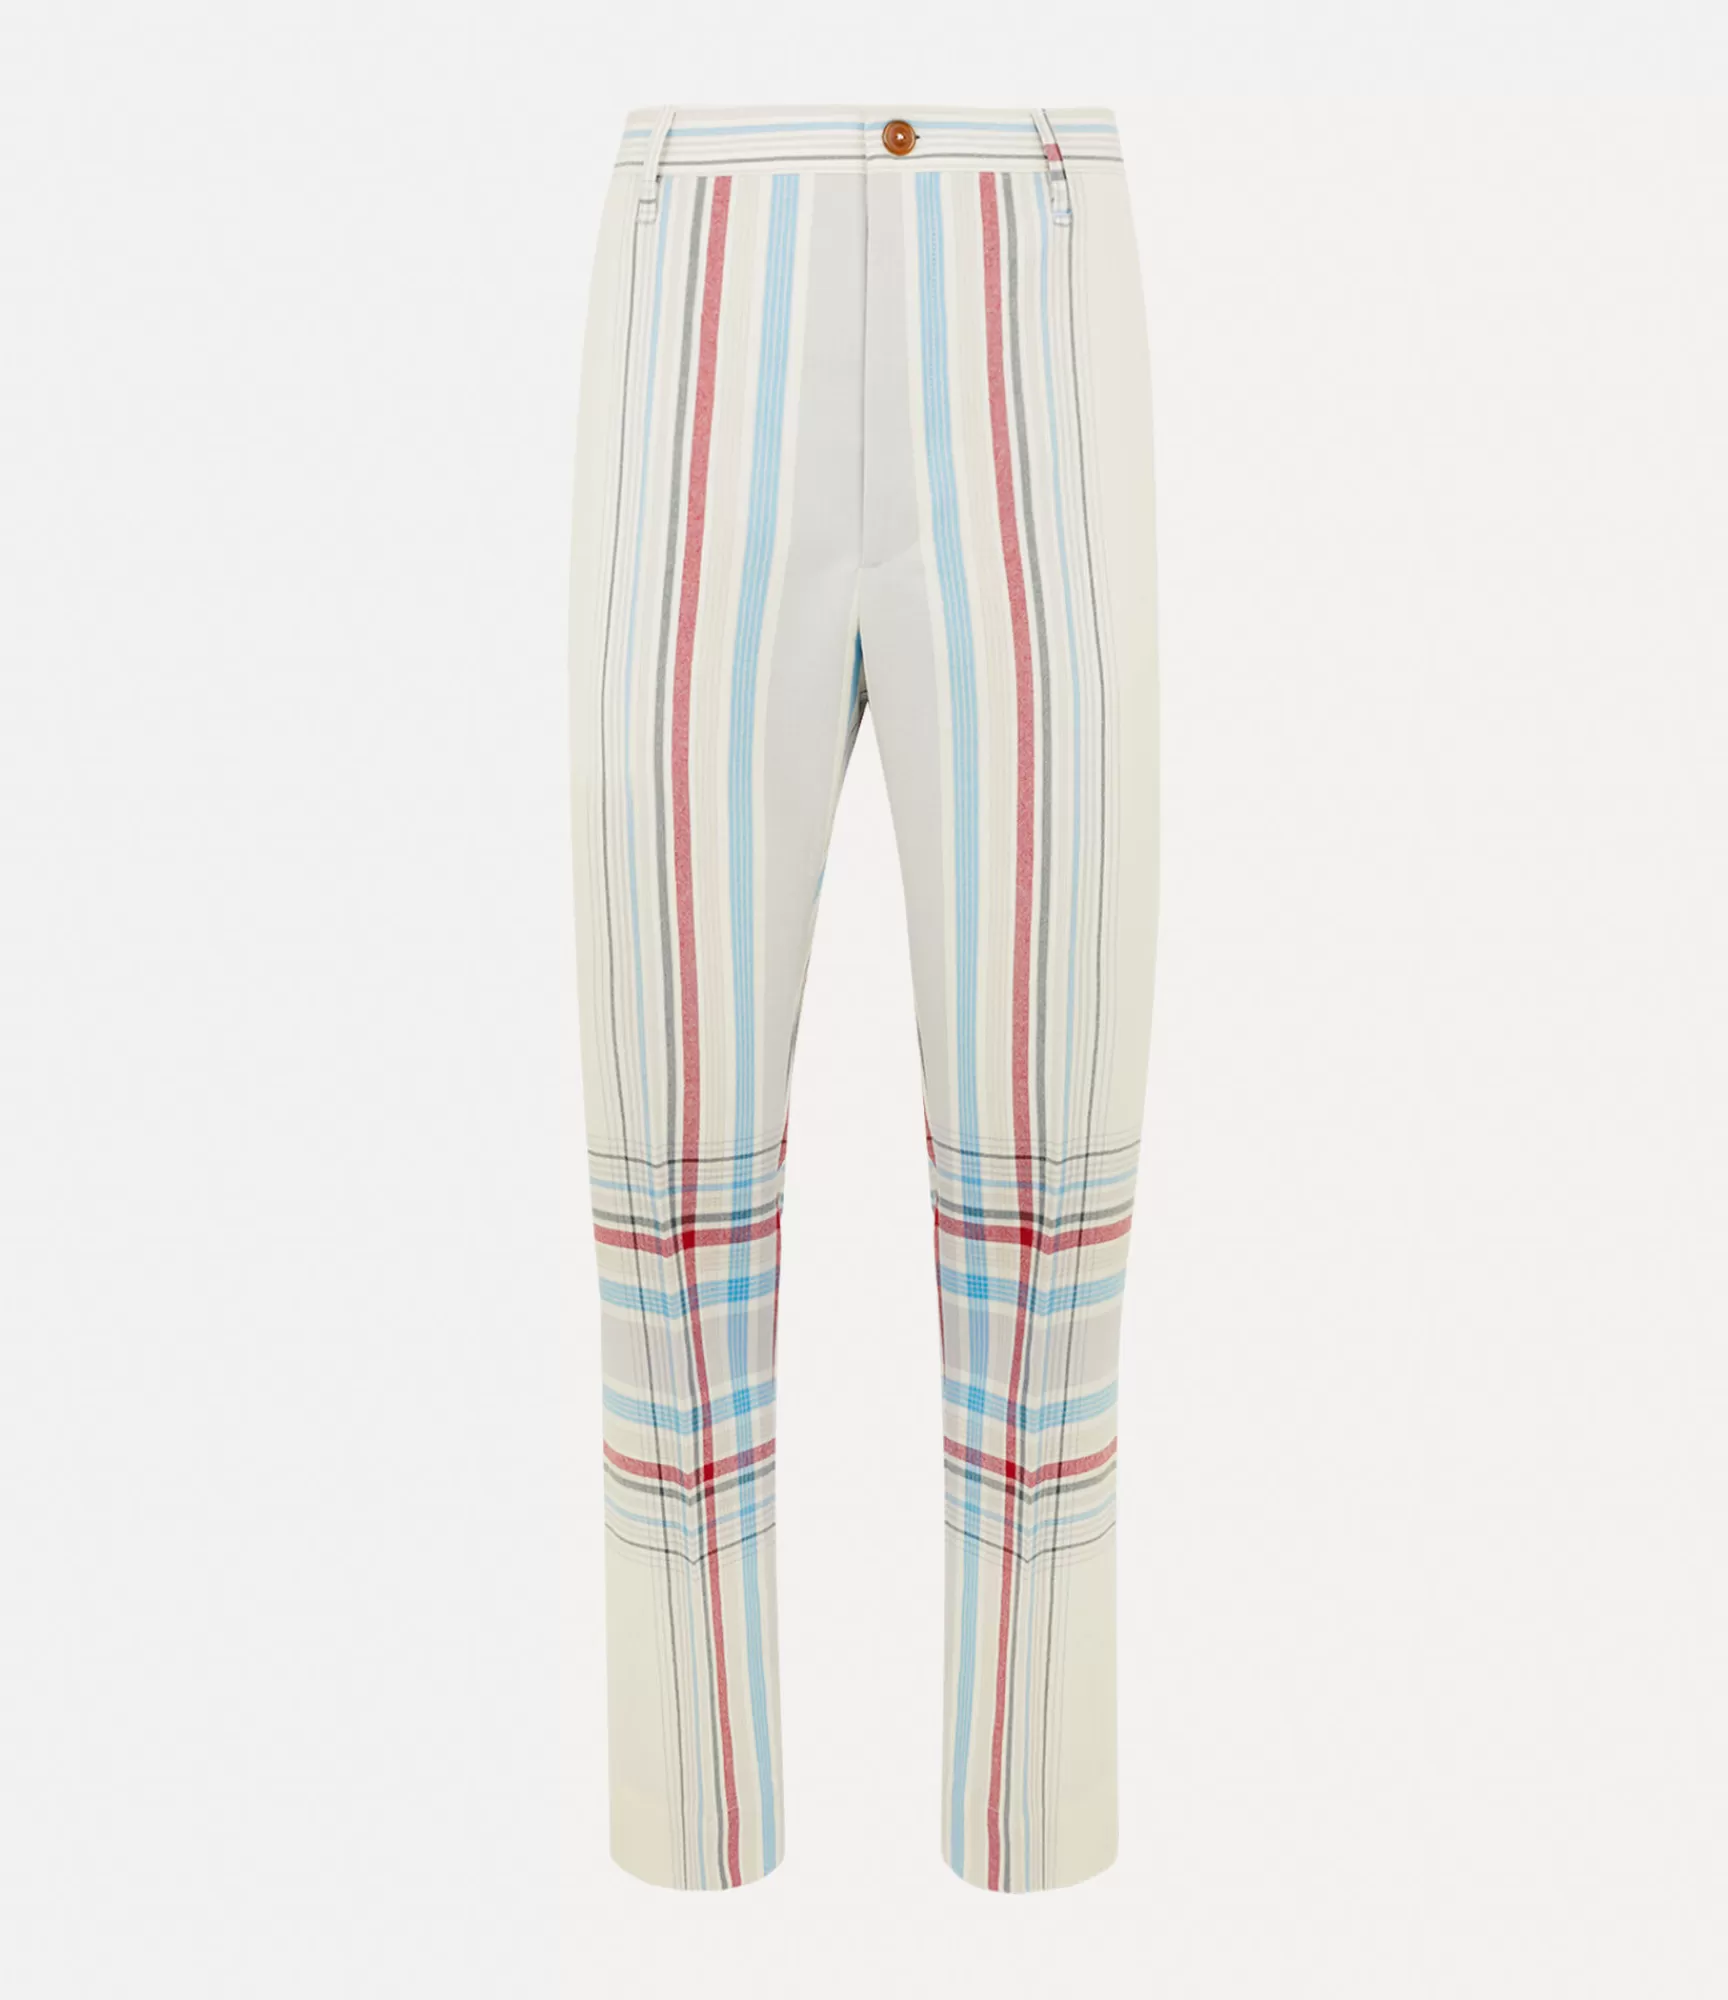 Vivienne Westwood Trousers and Shorts*M cruise trousers Multi